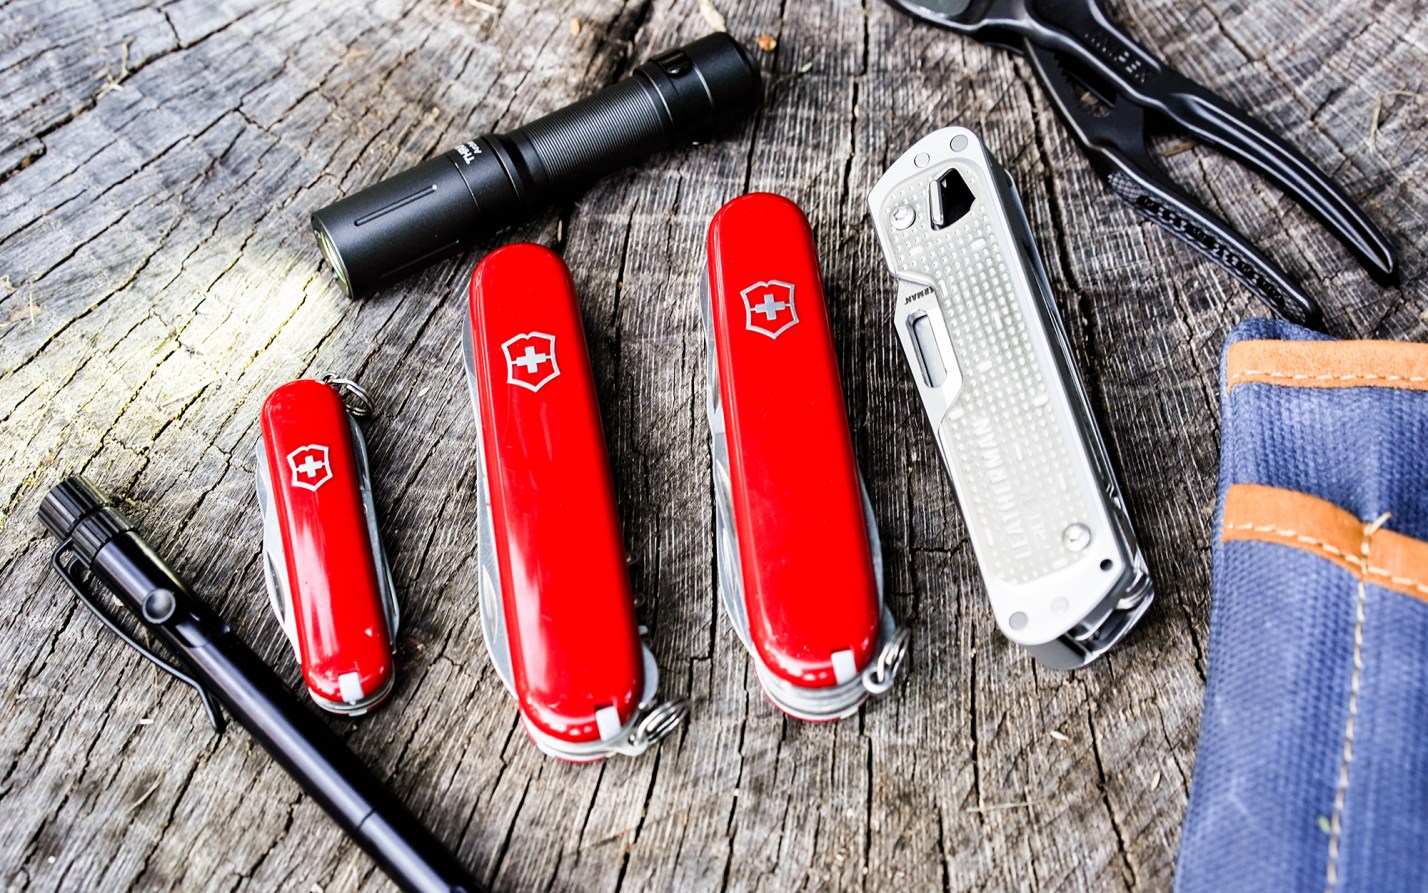 We tested the best Swiss army knives.